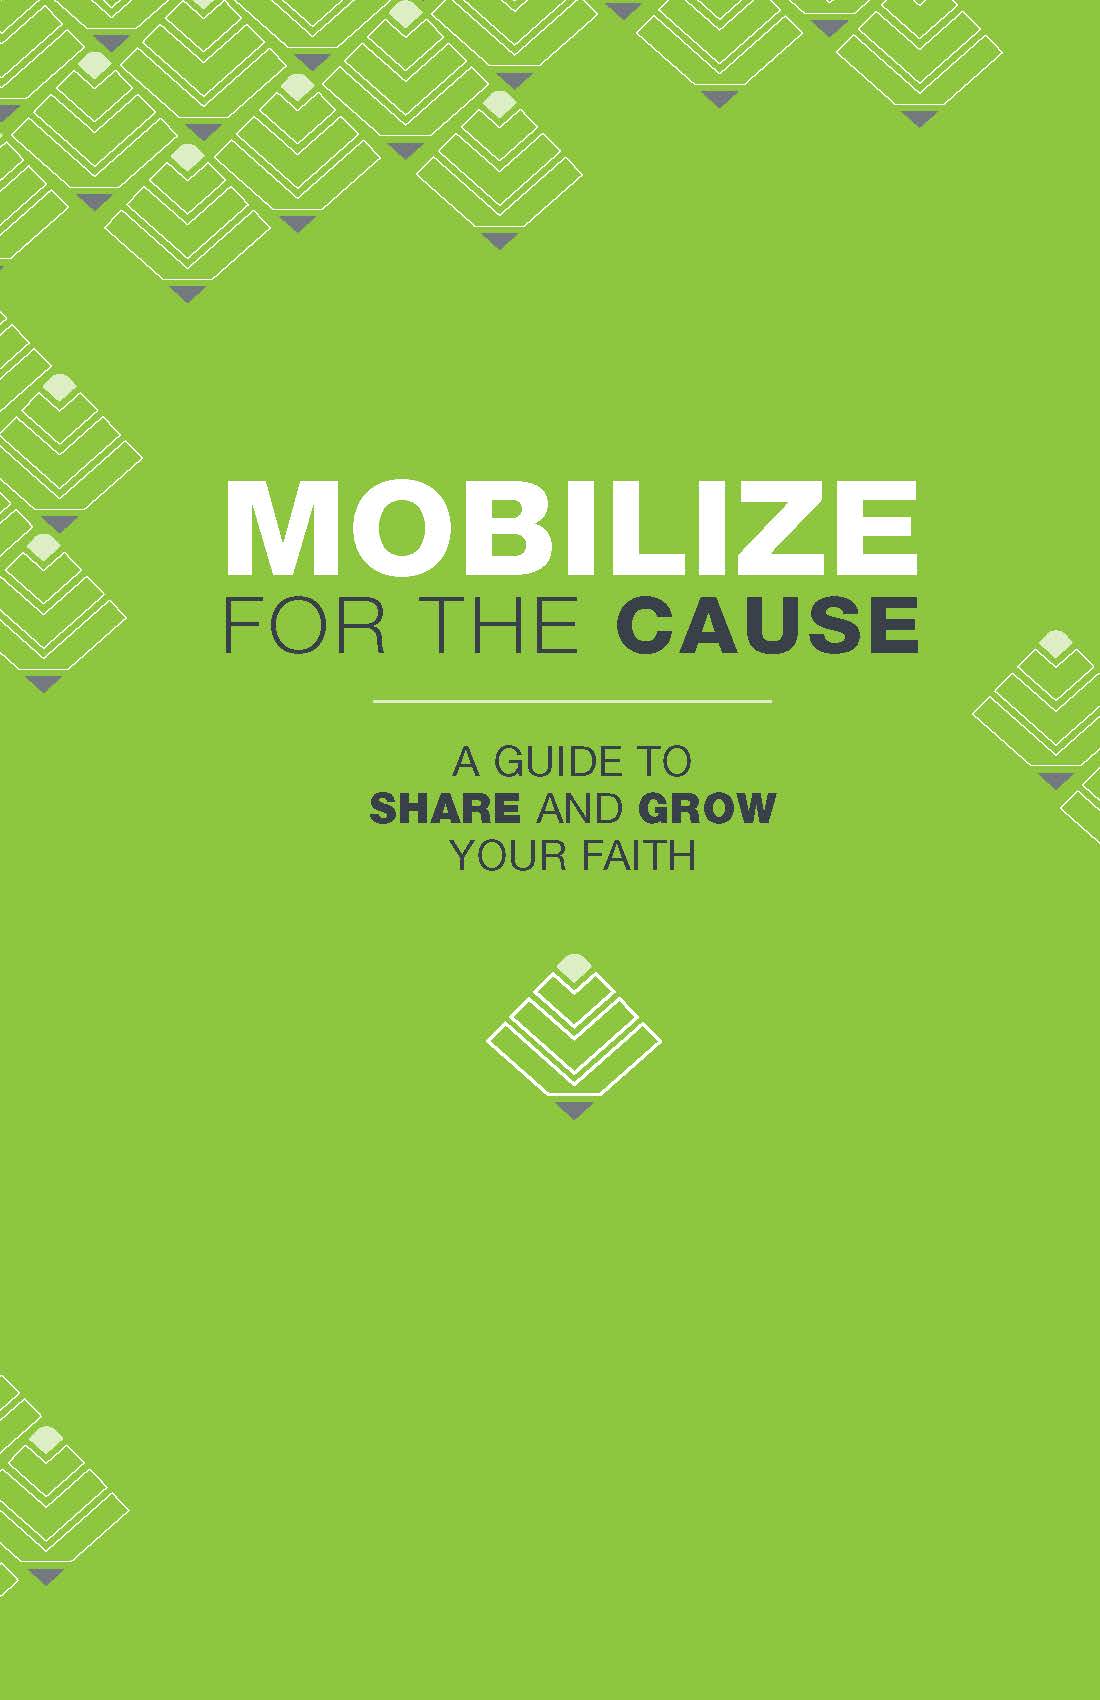 Quiet Time Interactive Introductory Edition with Mobilize for the Cause Content